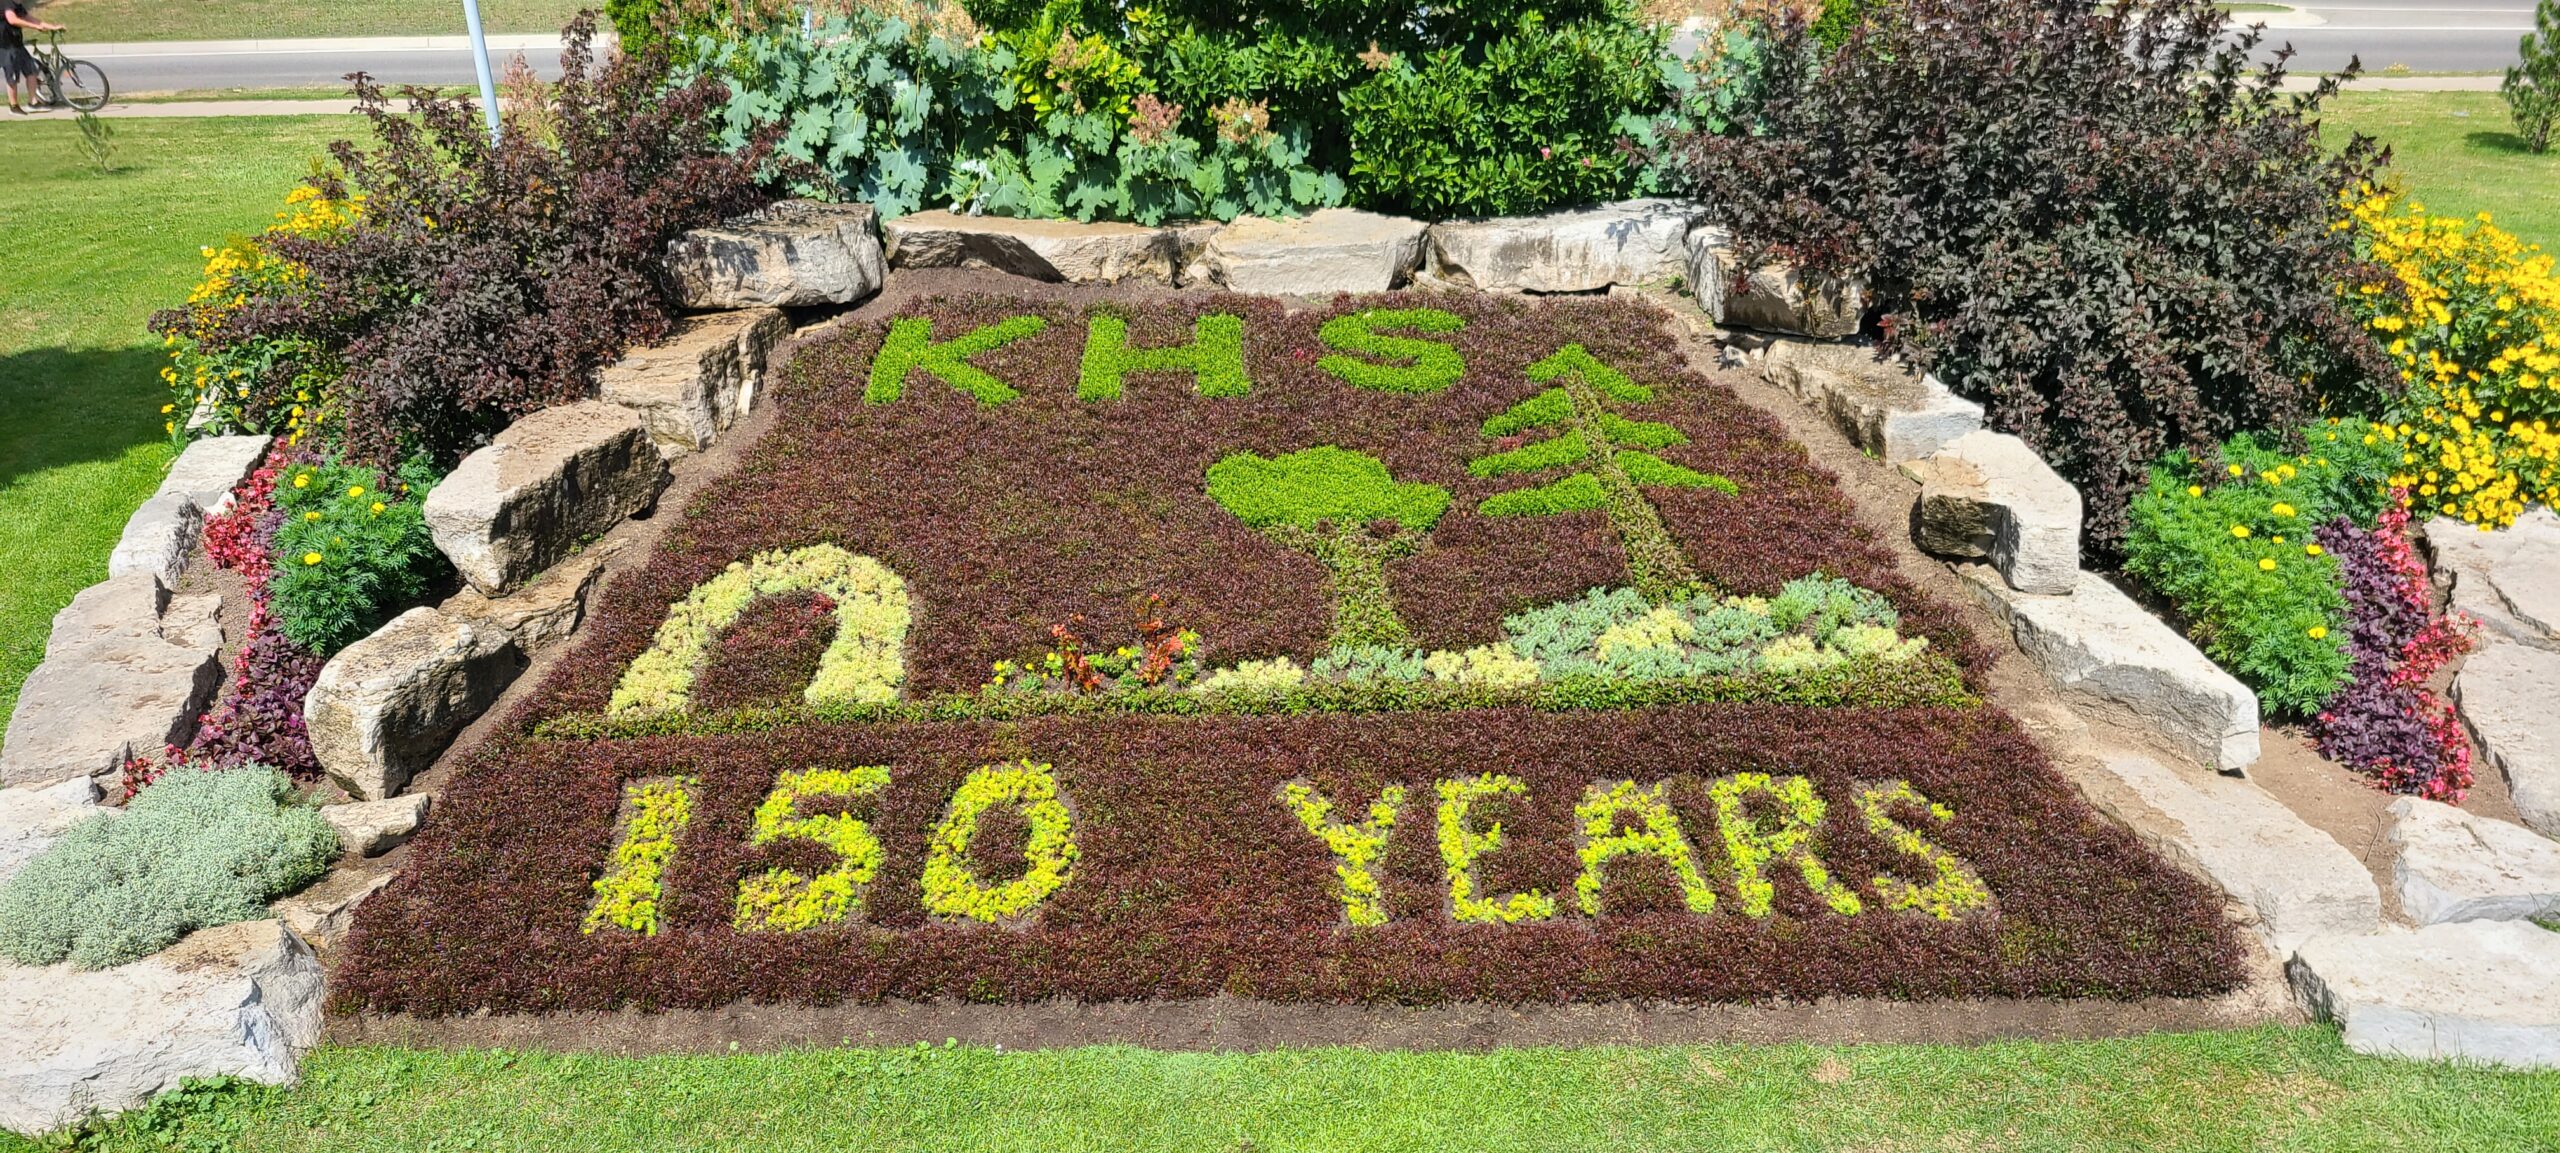 a garden planted to read KHS 150 Years and an image of an arch and tree